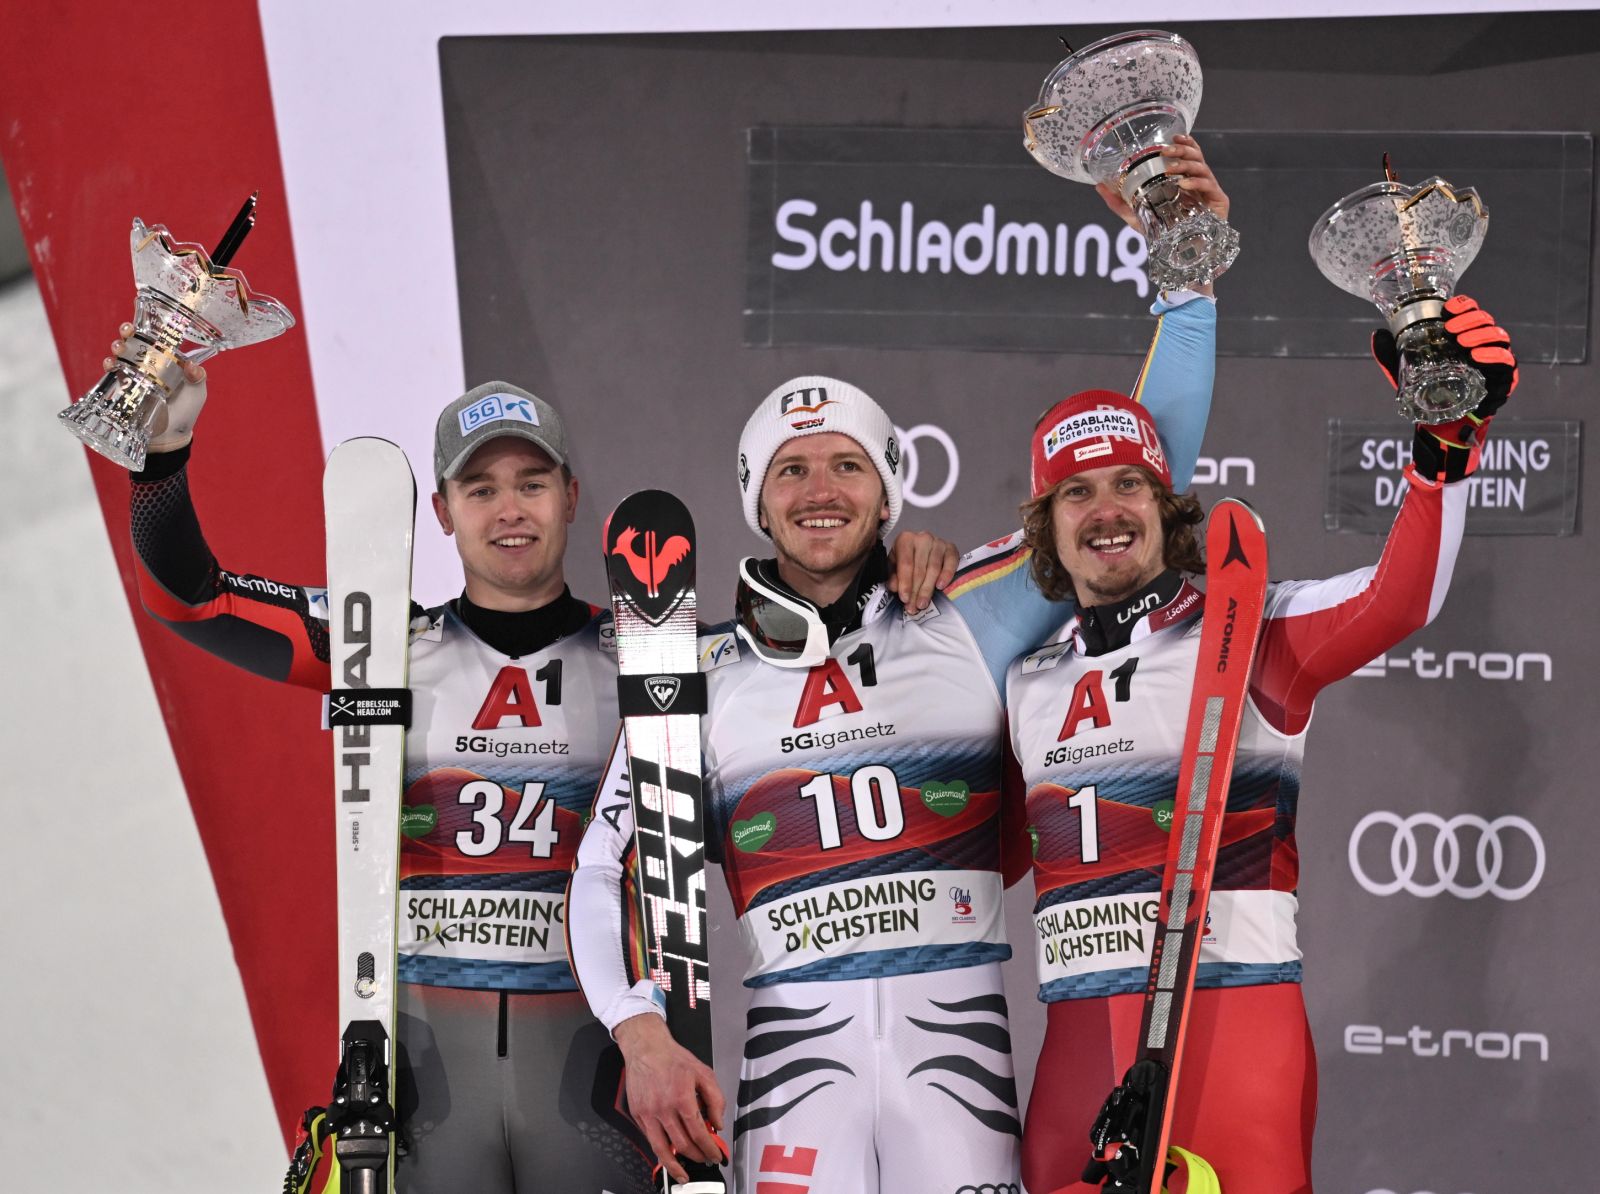 epa09709173 Third placed Manuel Feller (R) of Austria, winner Linus Strasser (C) of Germany and second placed Atle Lie Mcgrath (L) of Norway celebrate on the podium after the men's Slalom race of the FIS Alpine Skiing World Cup event in Schladming, Austria, 25 January 2022.  EPA/CHRISTIAN BRUNA